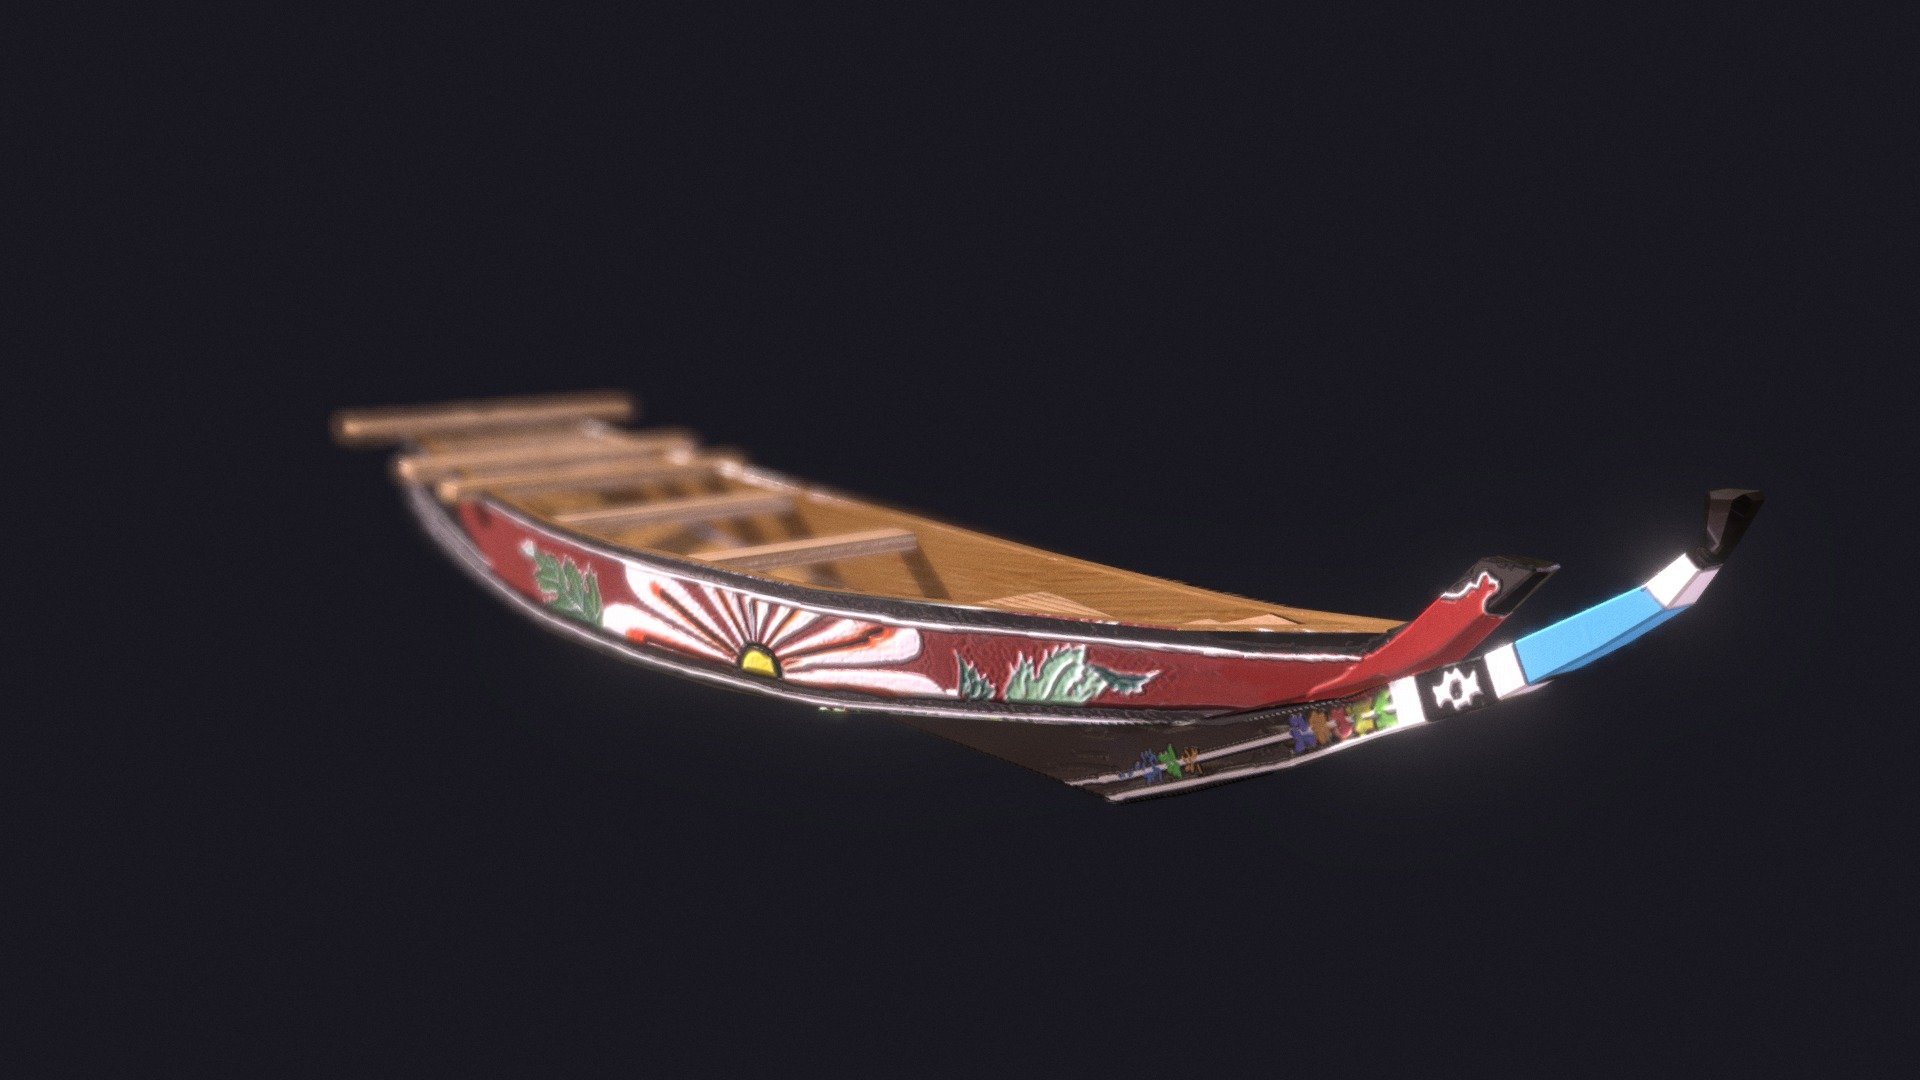 Kujirabune, a type of traditional Japanese whaleboat, distinguishable thanks to the beautifully painted hull.

Source: https://wasenmodeler.com/tag/kujirabune/ - lowpoly kujirabune boat - 3D model by birkat 3d model